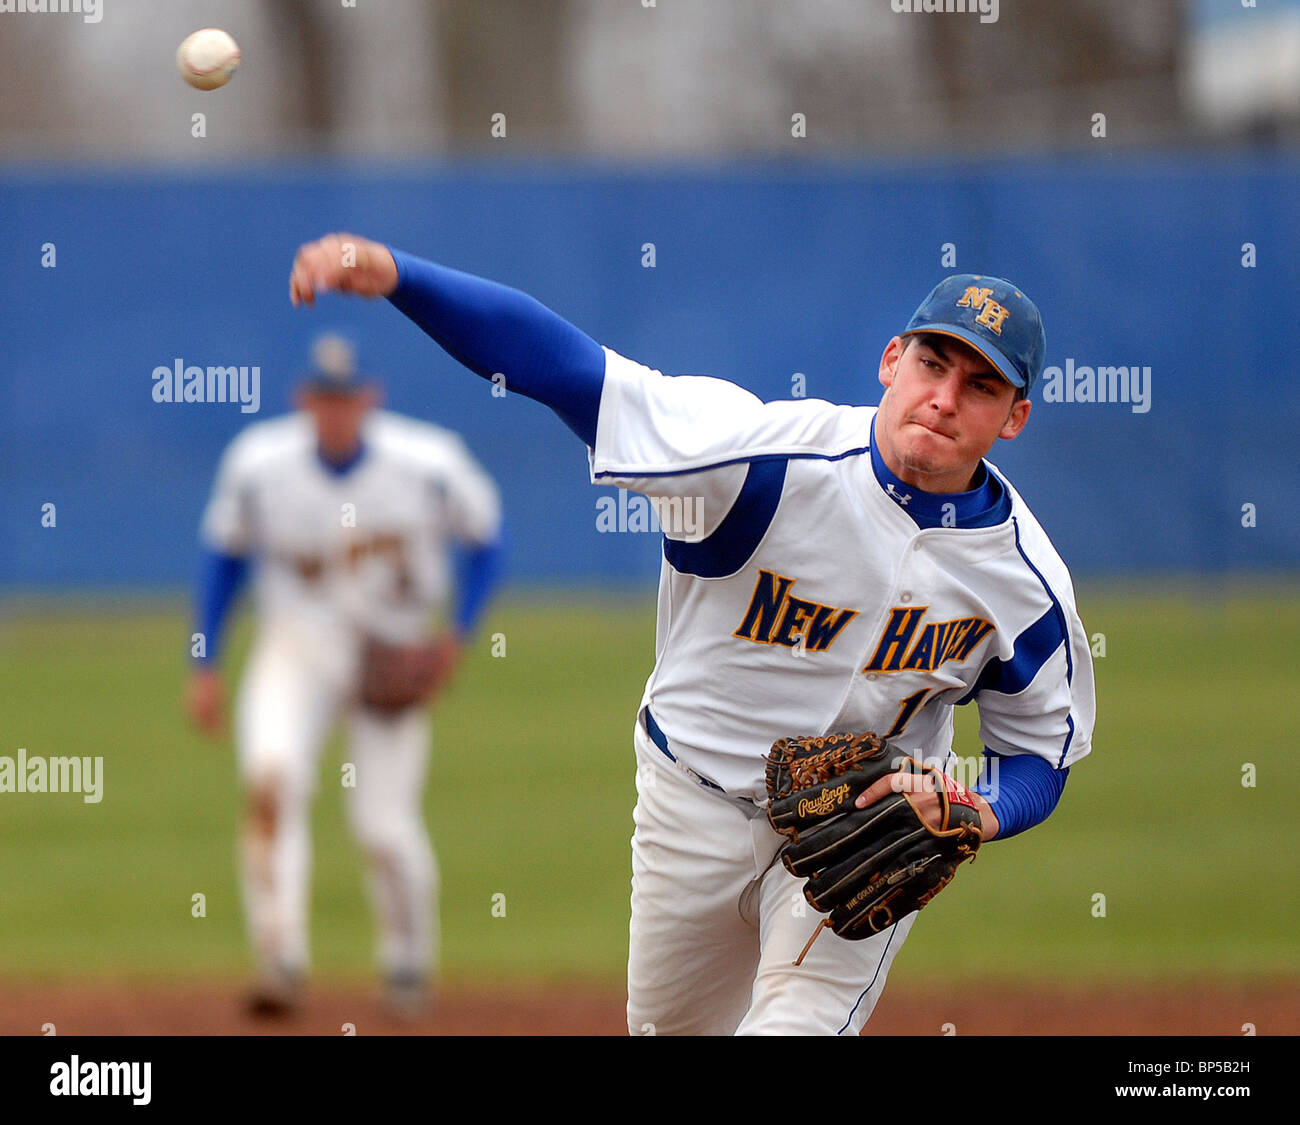 A College baseball pitchers delivers during a game in New Haven CT USA. University of New Haven. Stock Photo